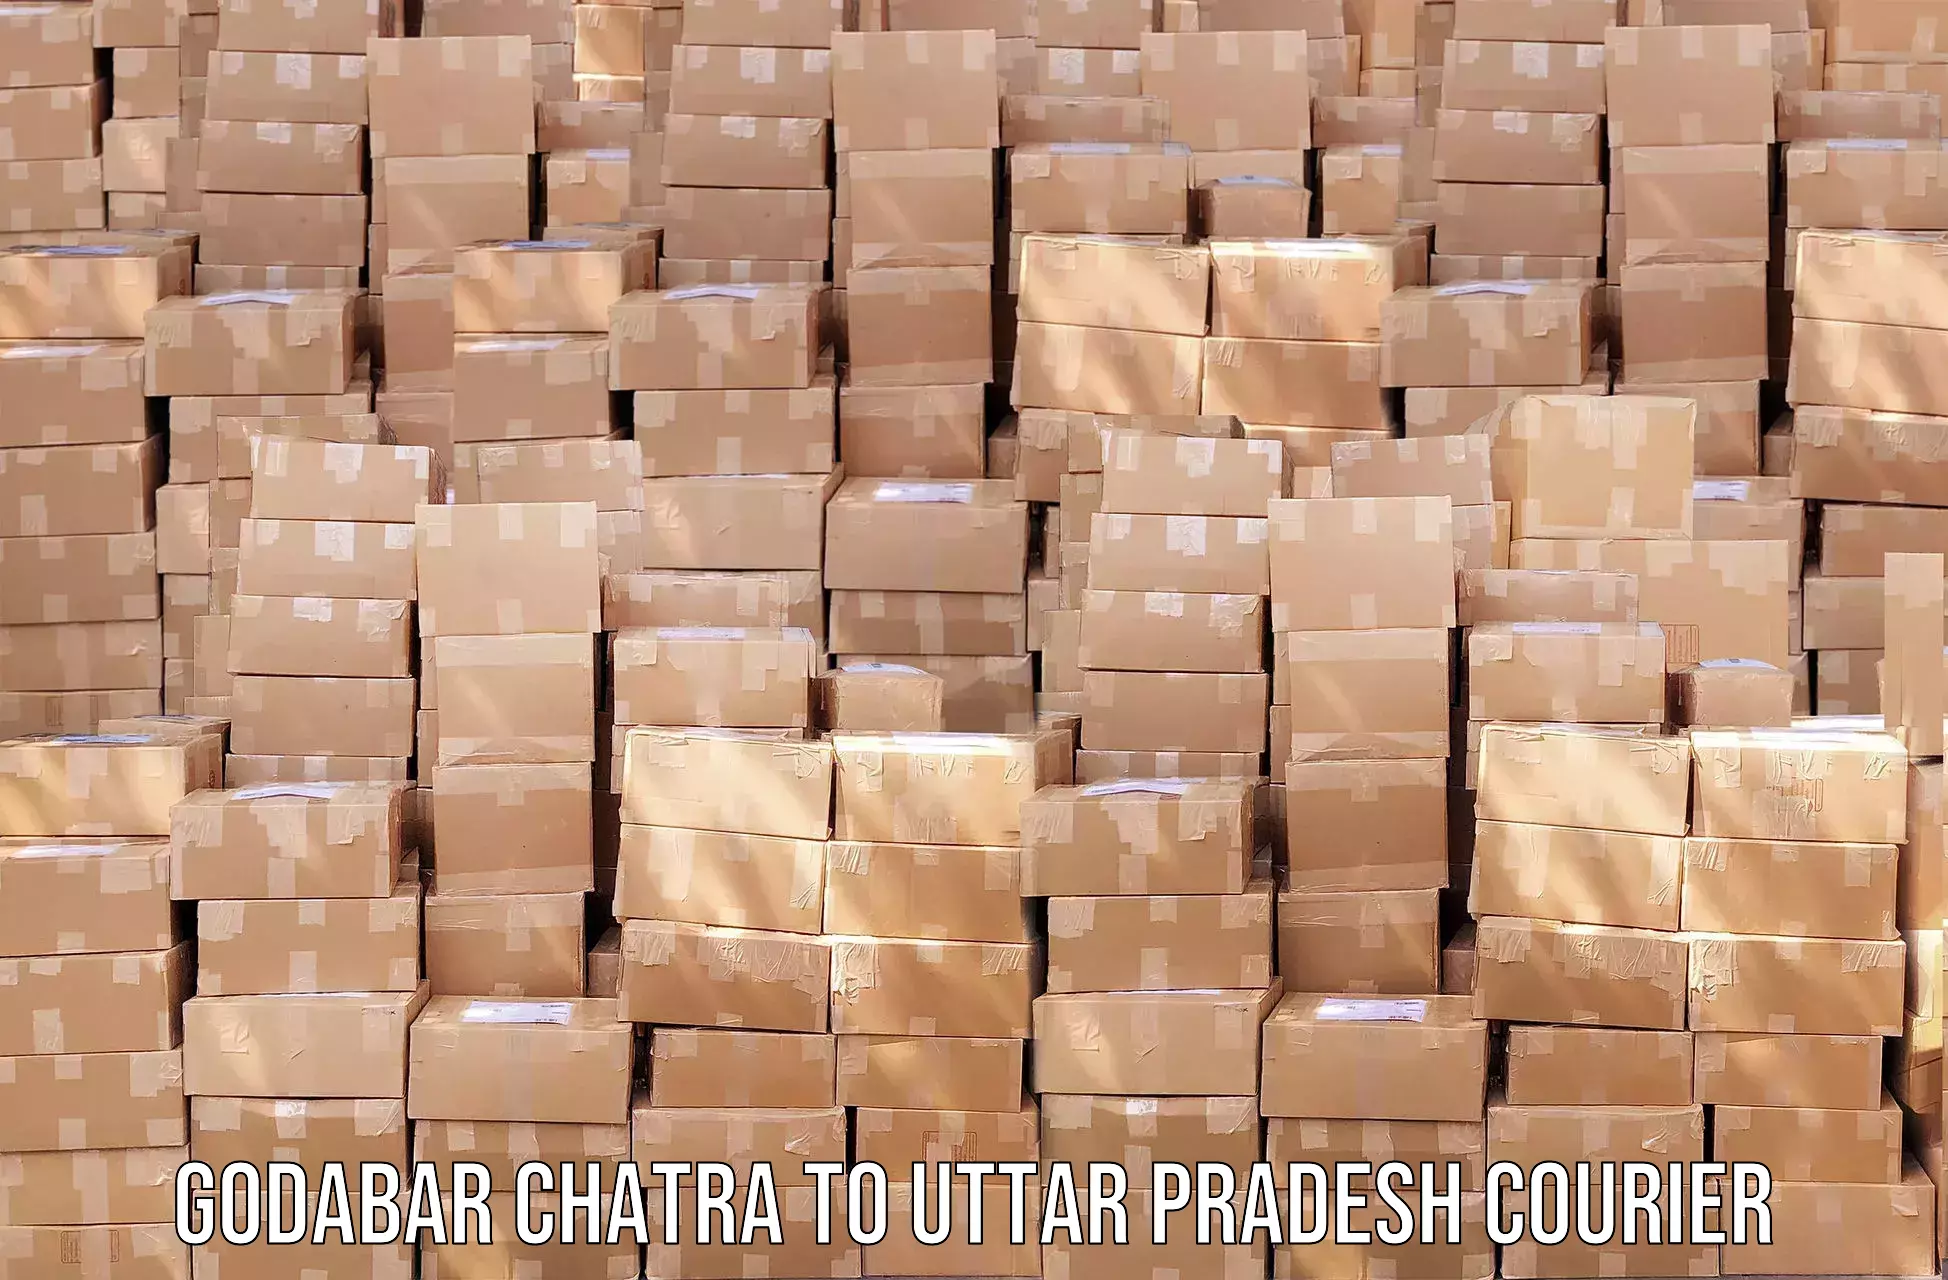 Reliable courier service Godabar Chatra to Mainpuri